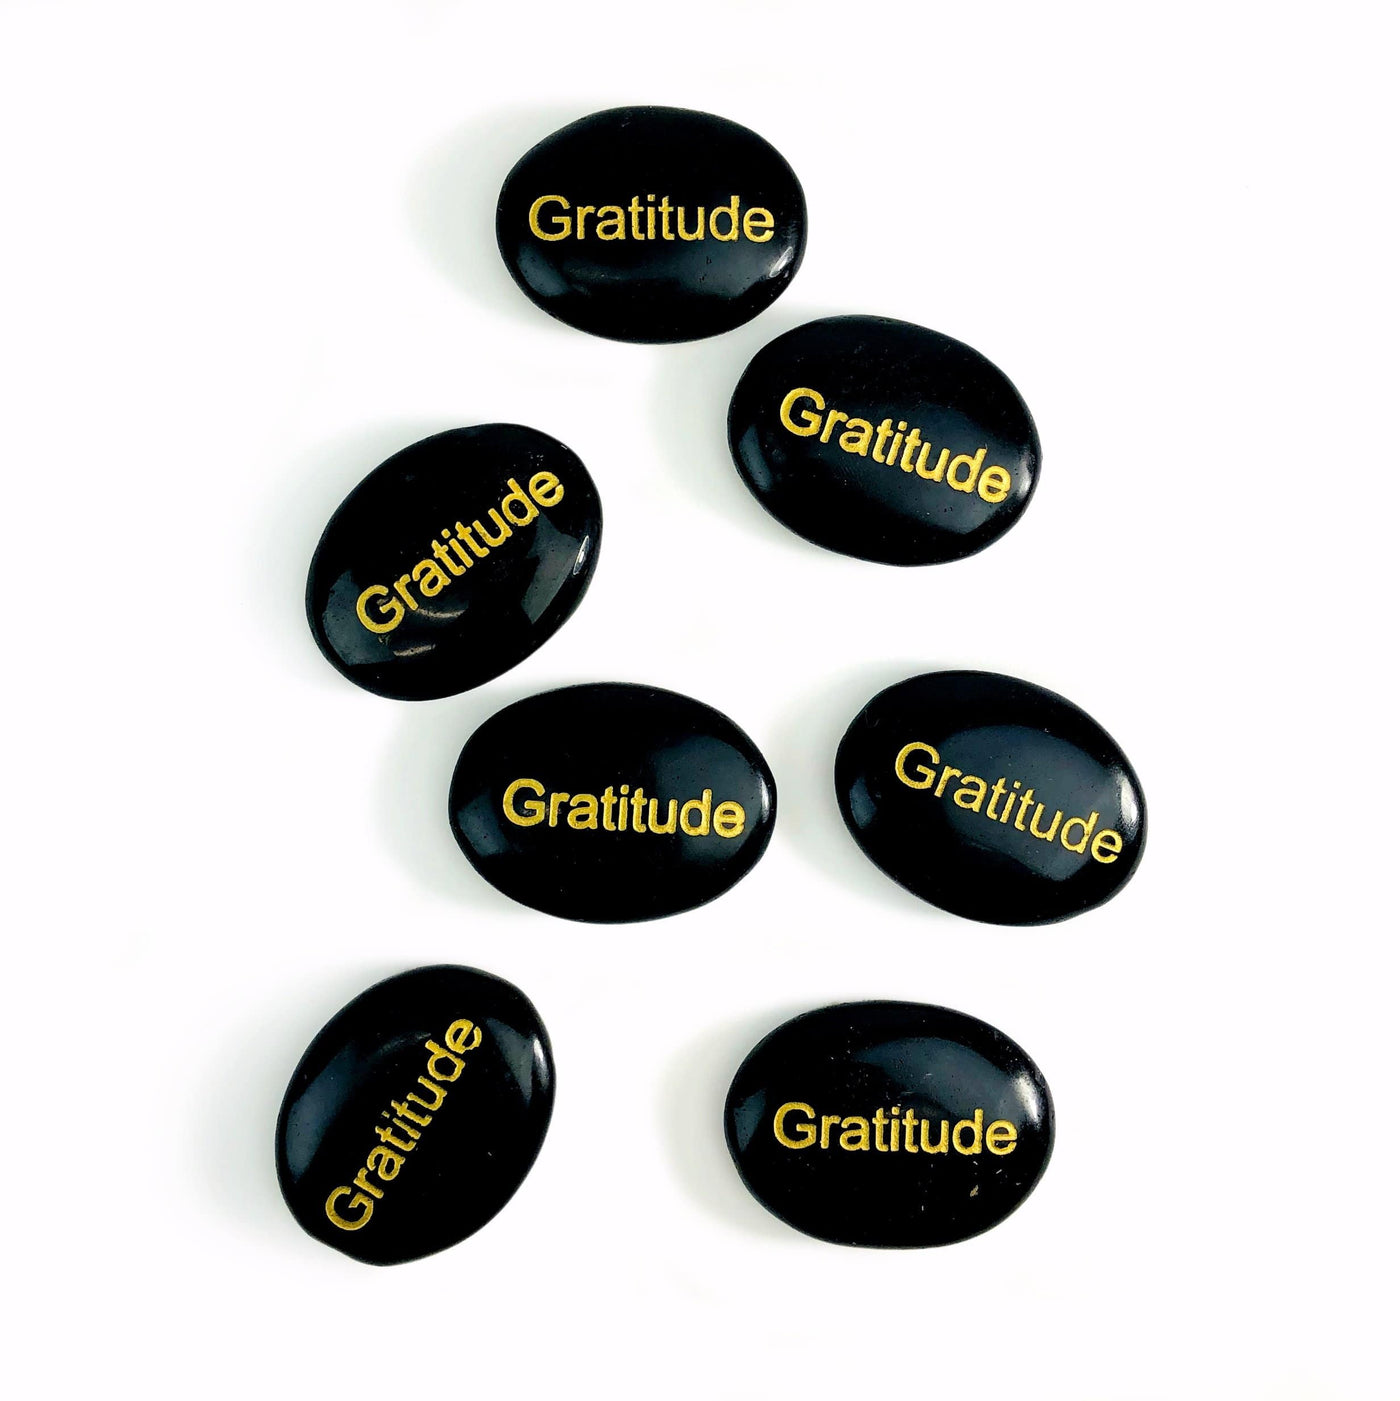 Seven Black Obsidian "Gratitude" Pocket Palm Stones laid out on a white surface.